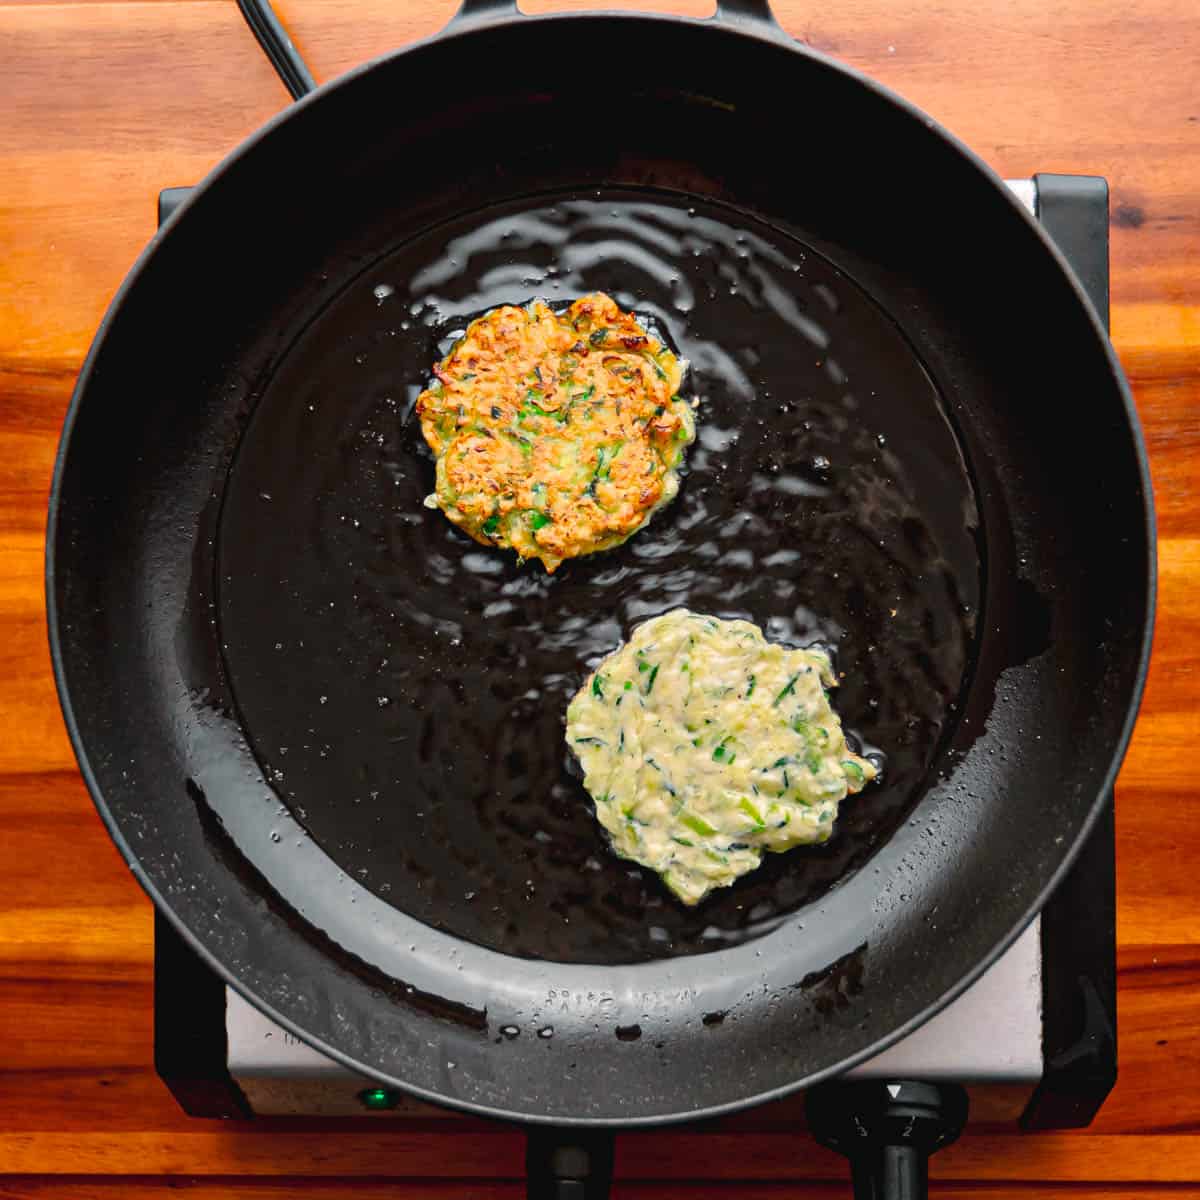 Once the oil is hot and ready, use a spoon to scoop portions of the zucchini mixture and gently place them into the heated oil. Slightly flatten each portion with the back of the spoon to shape them into fritters.